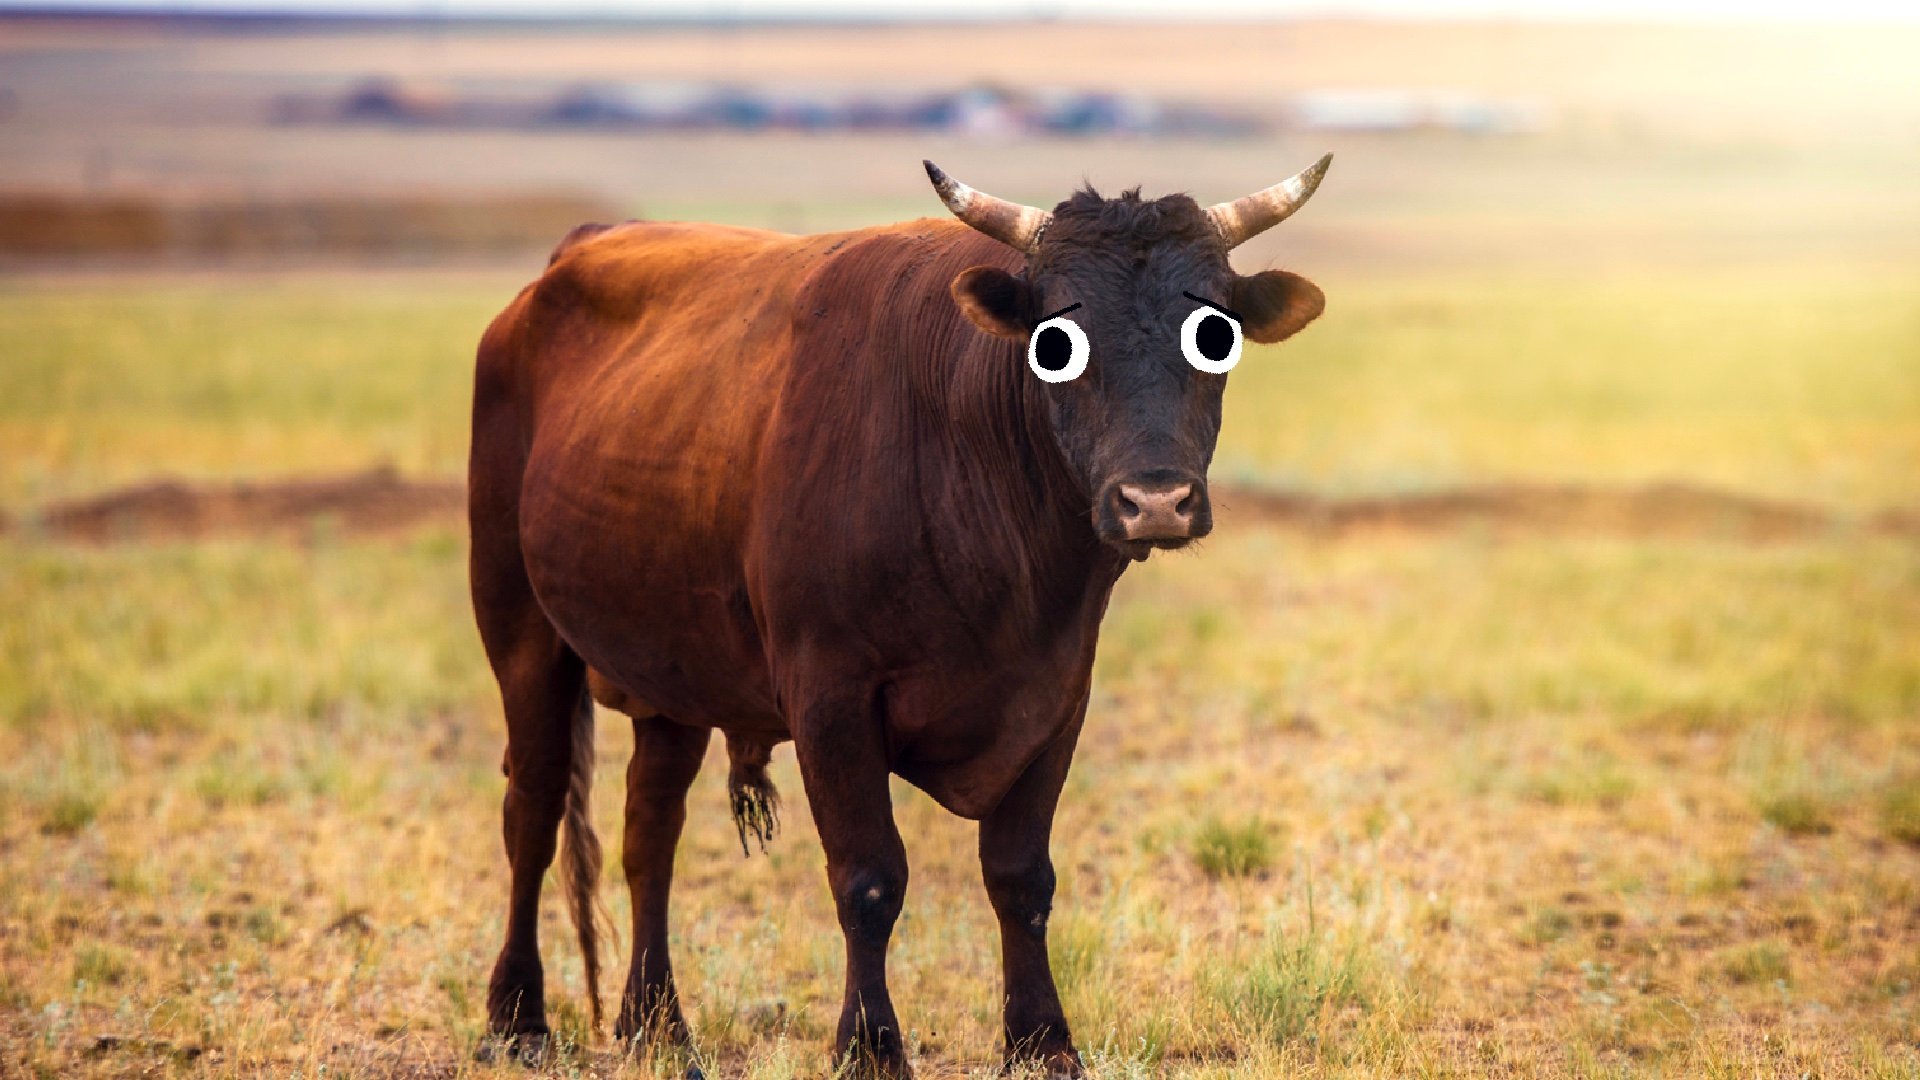 A bull standing in a field